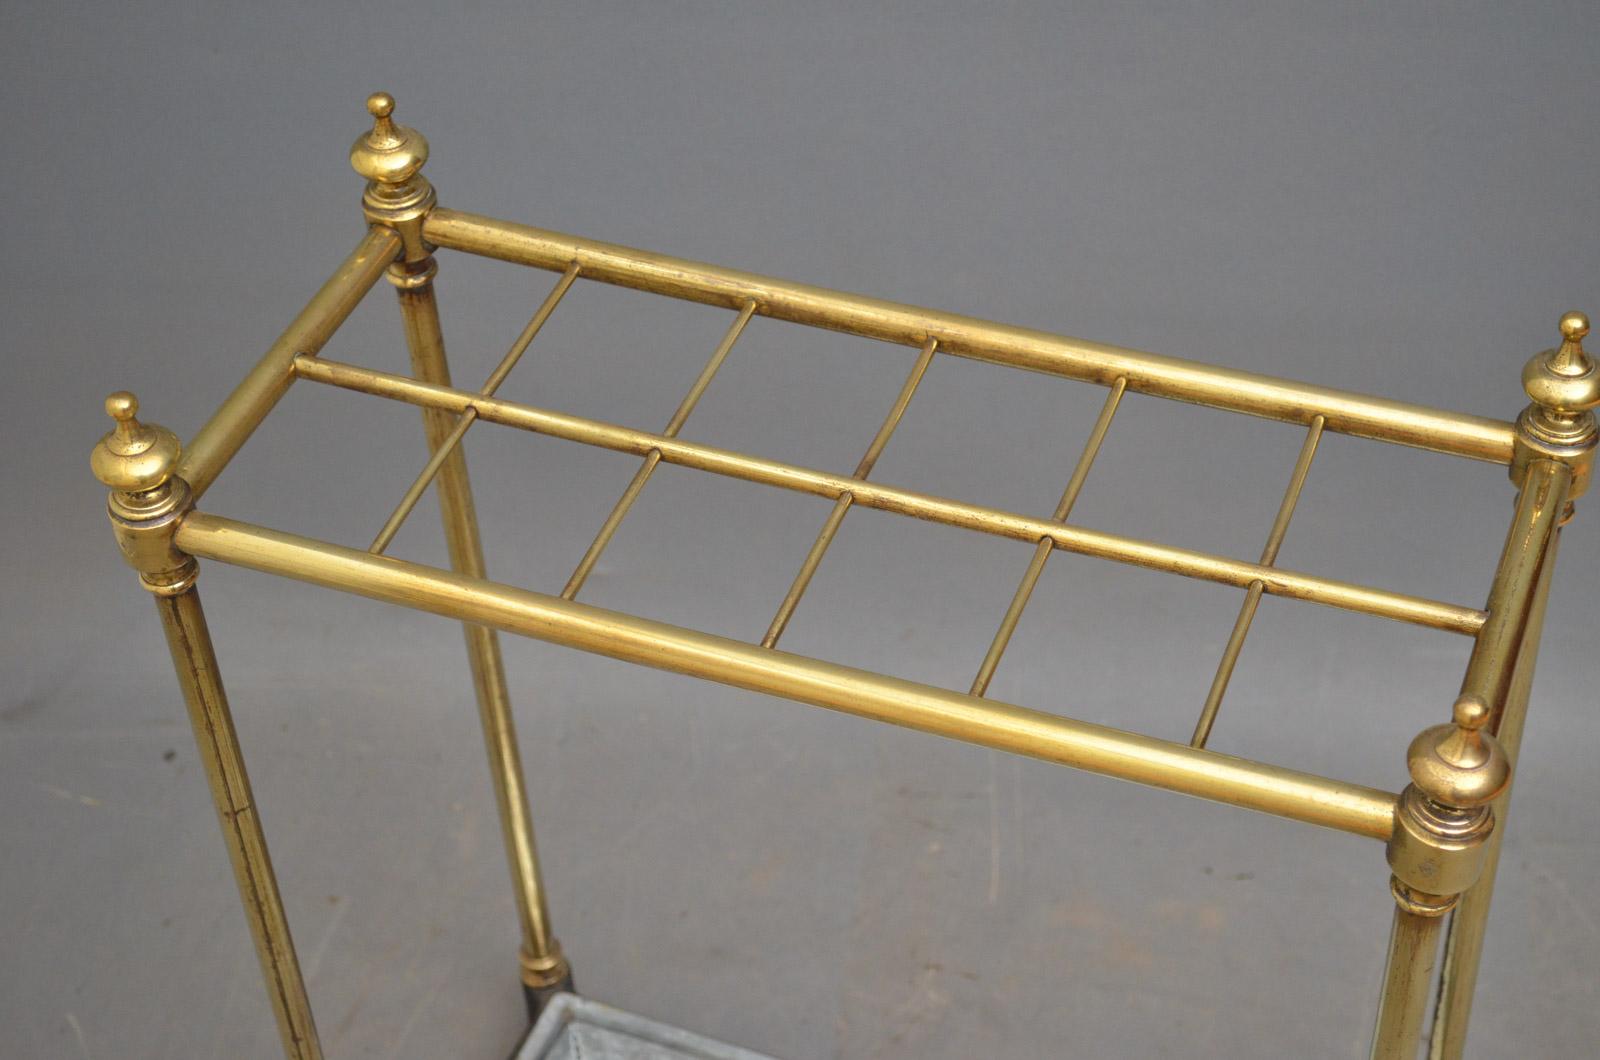 Sn4362, a Victorian brass umbrella stand / stick stand, having 12 sections for umbrellas and walking sticks with finials stamped with date lozenge and removable drip tray, all in fantastic condition throughout, ready to place at home, circa